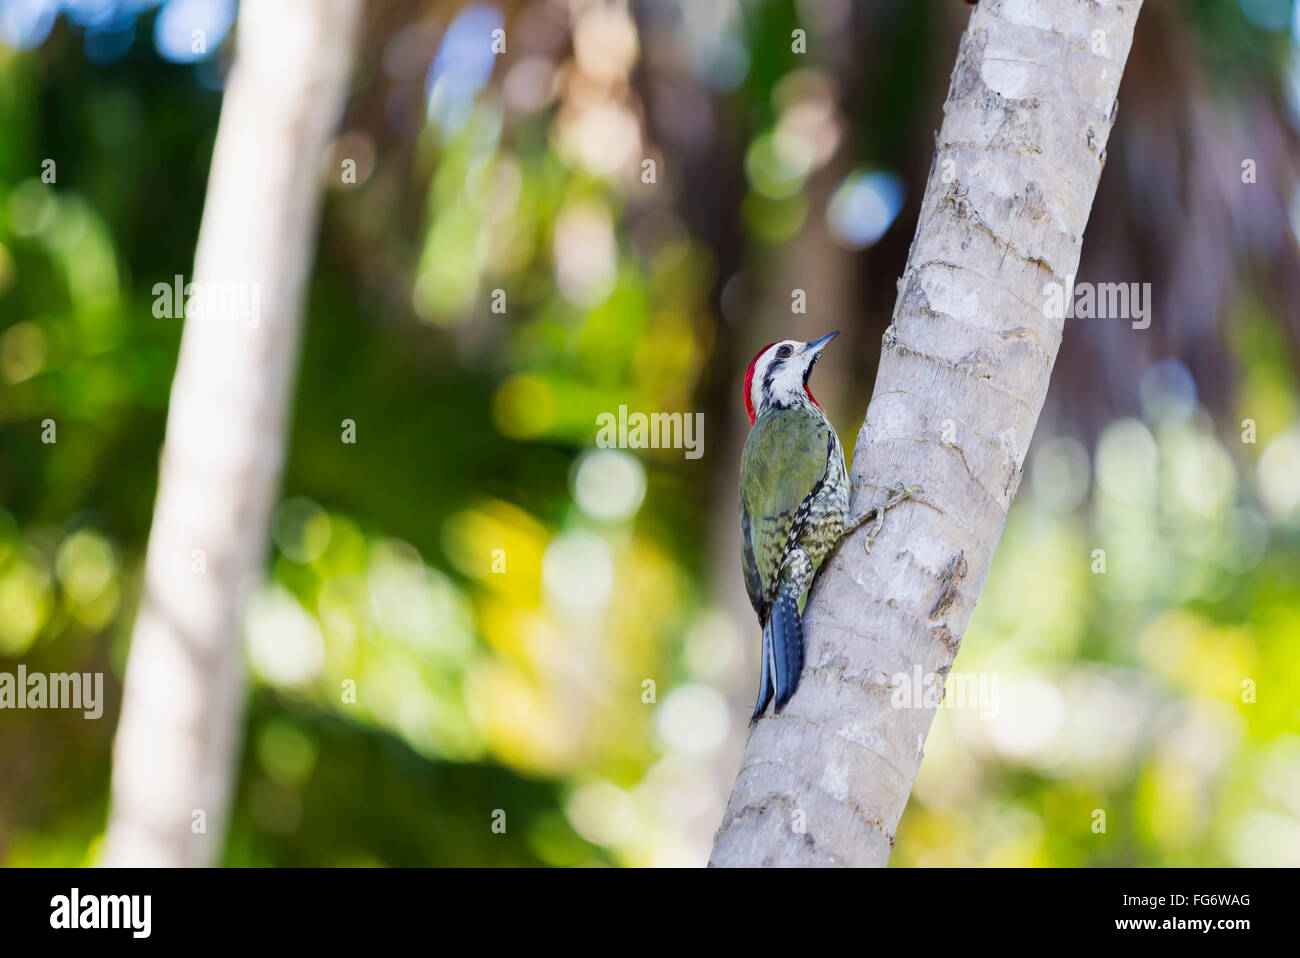 The endemic bird species Cuban green woodpecker (Xiphidiopicus percussus) perched on a palm tree trunk in its natural habitat outdoors; Varadero, Cuba Stock Photo